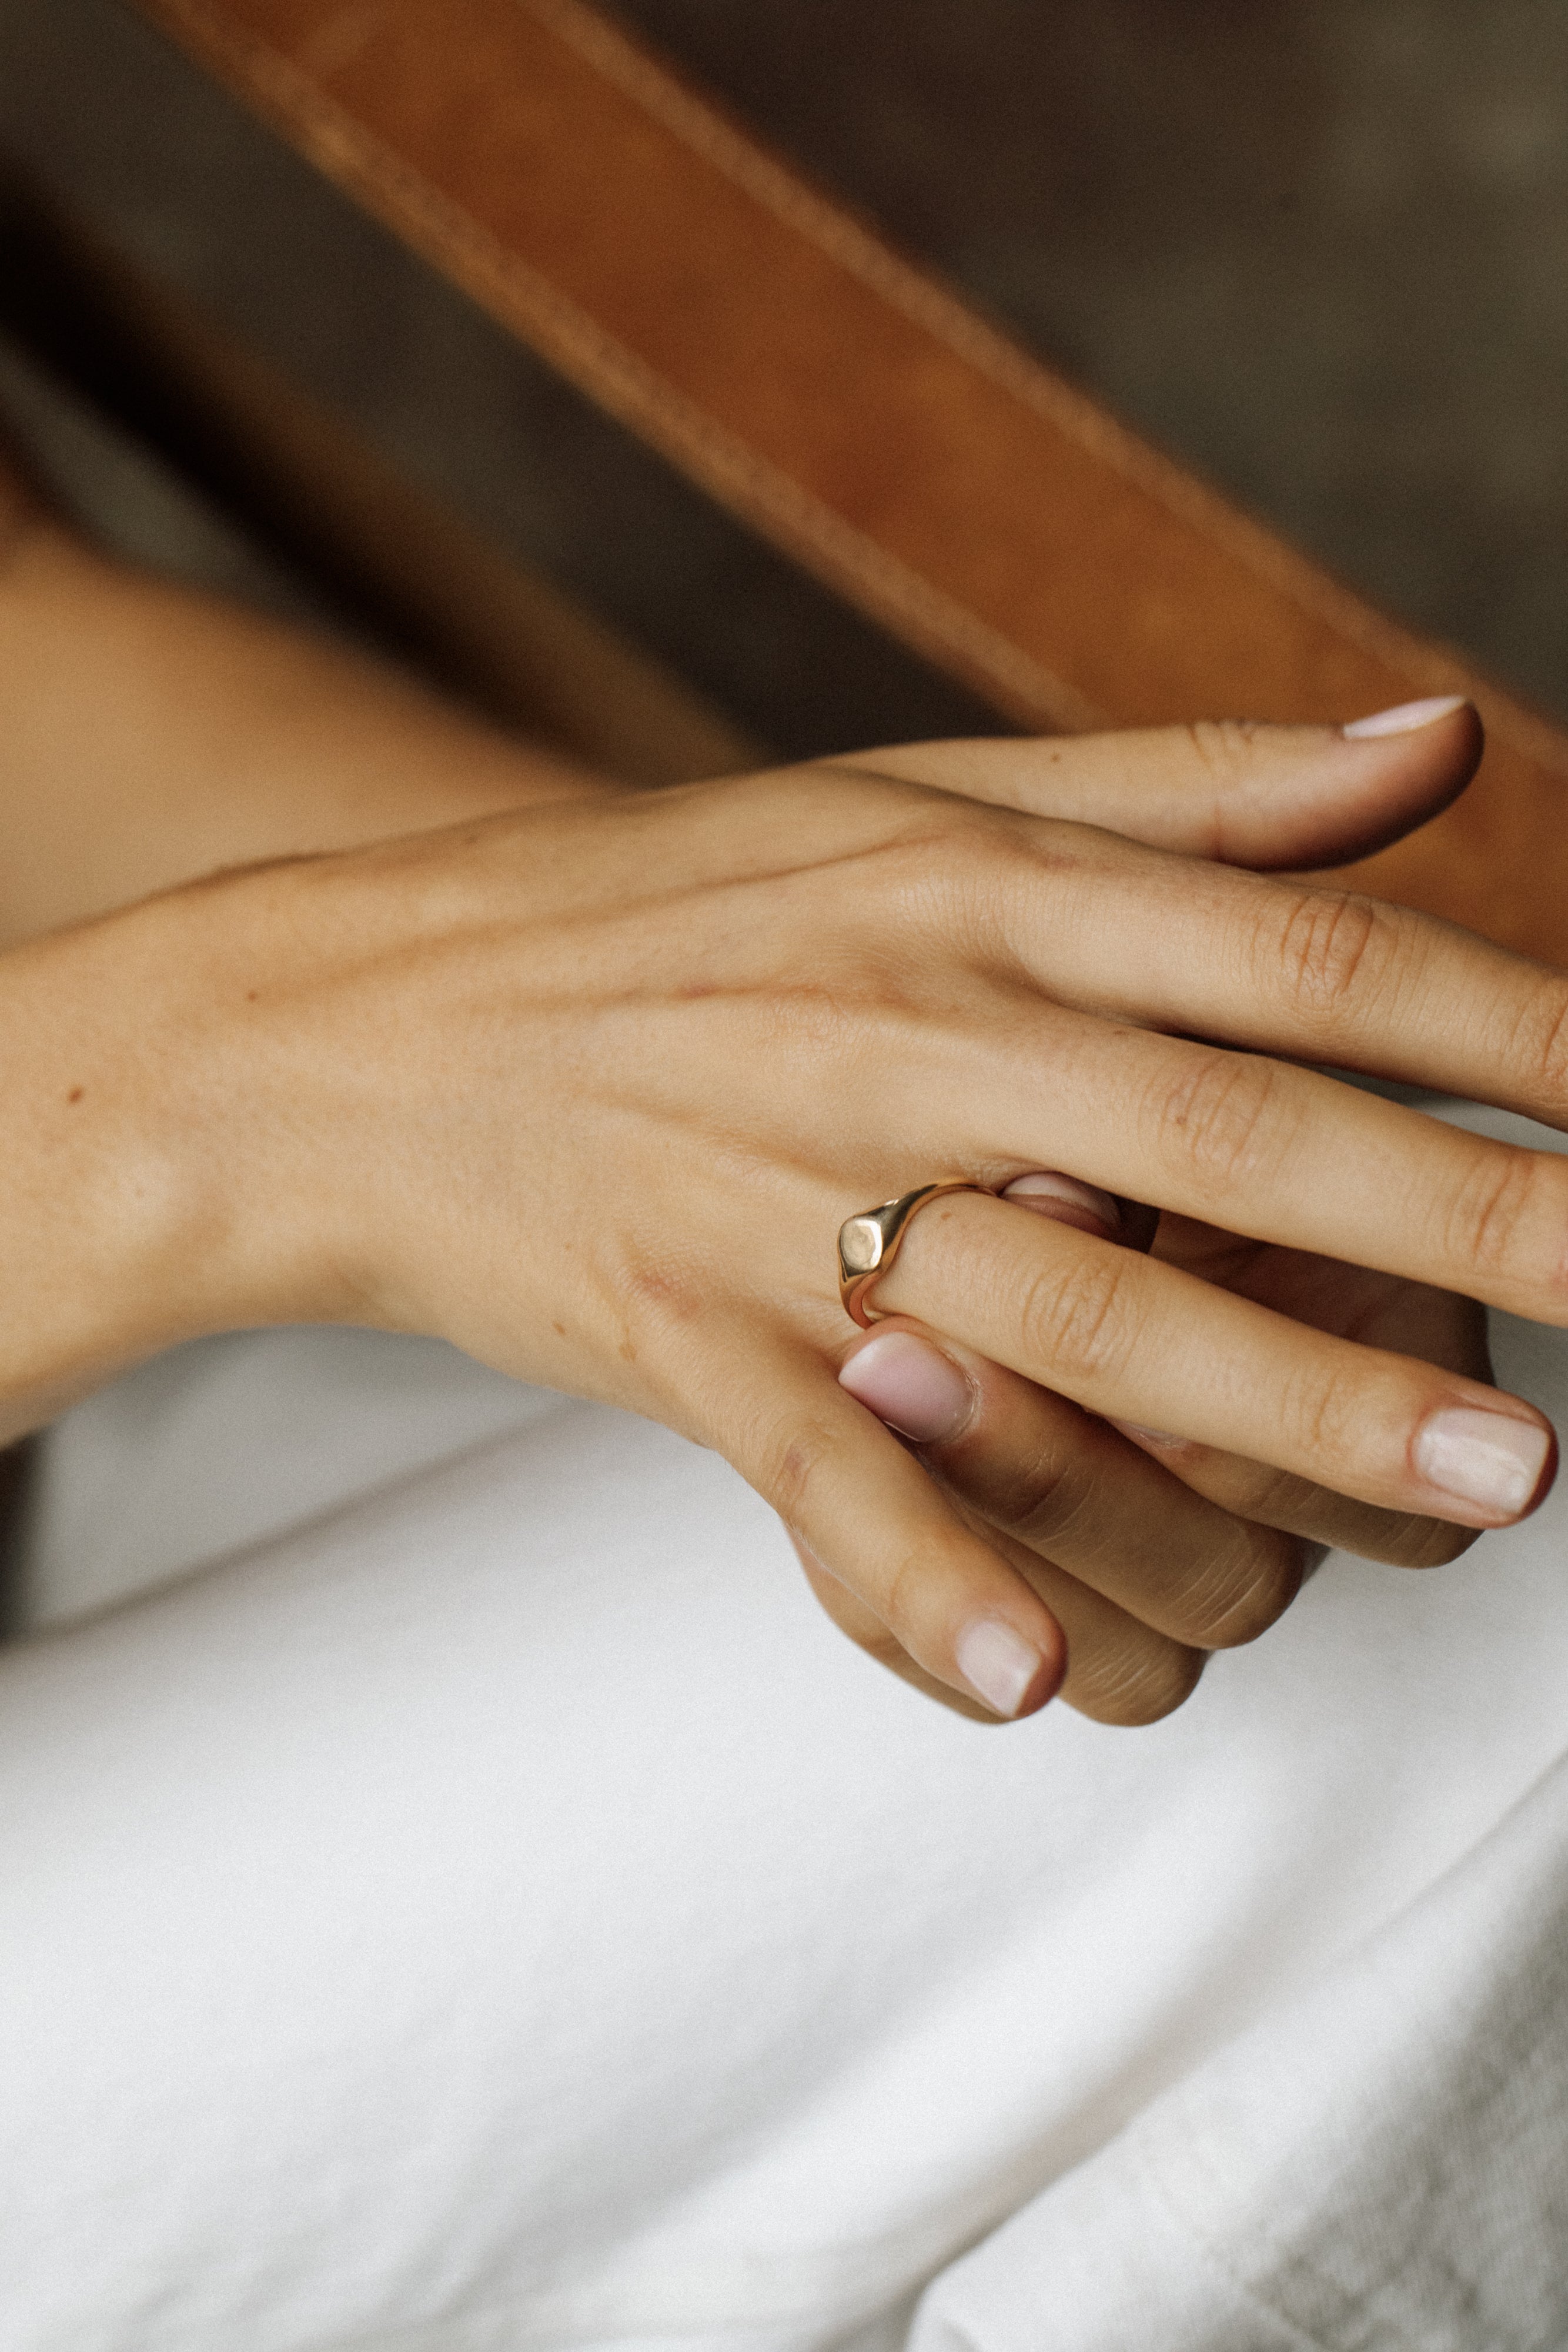 Signet rings are perfect for best friends